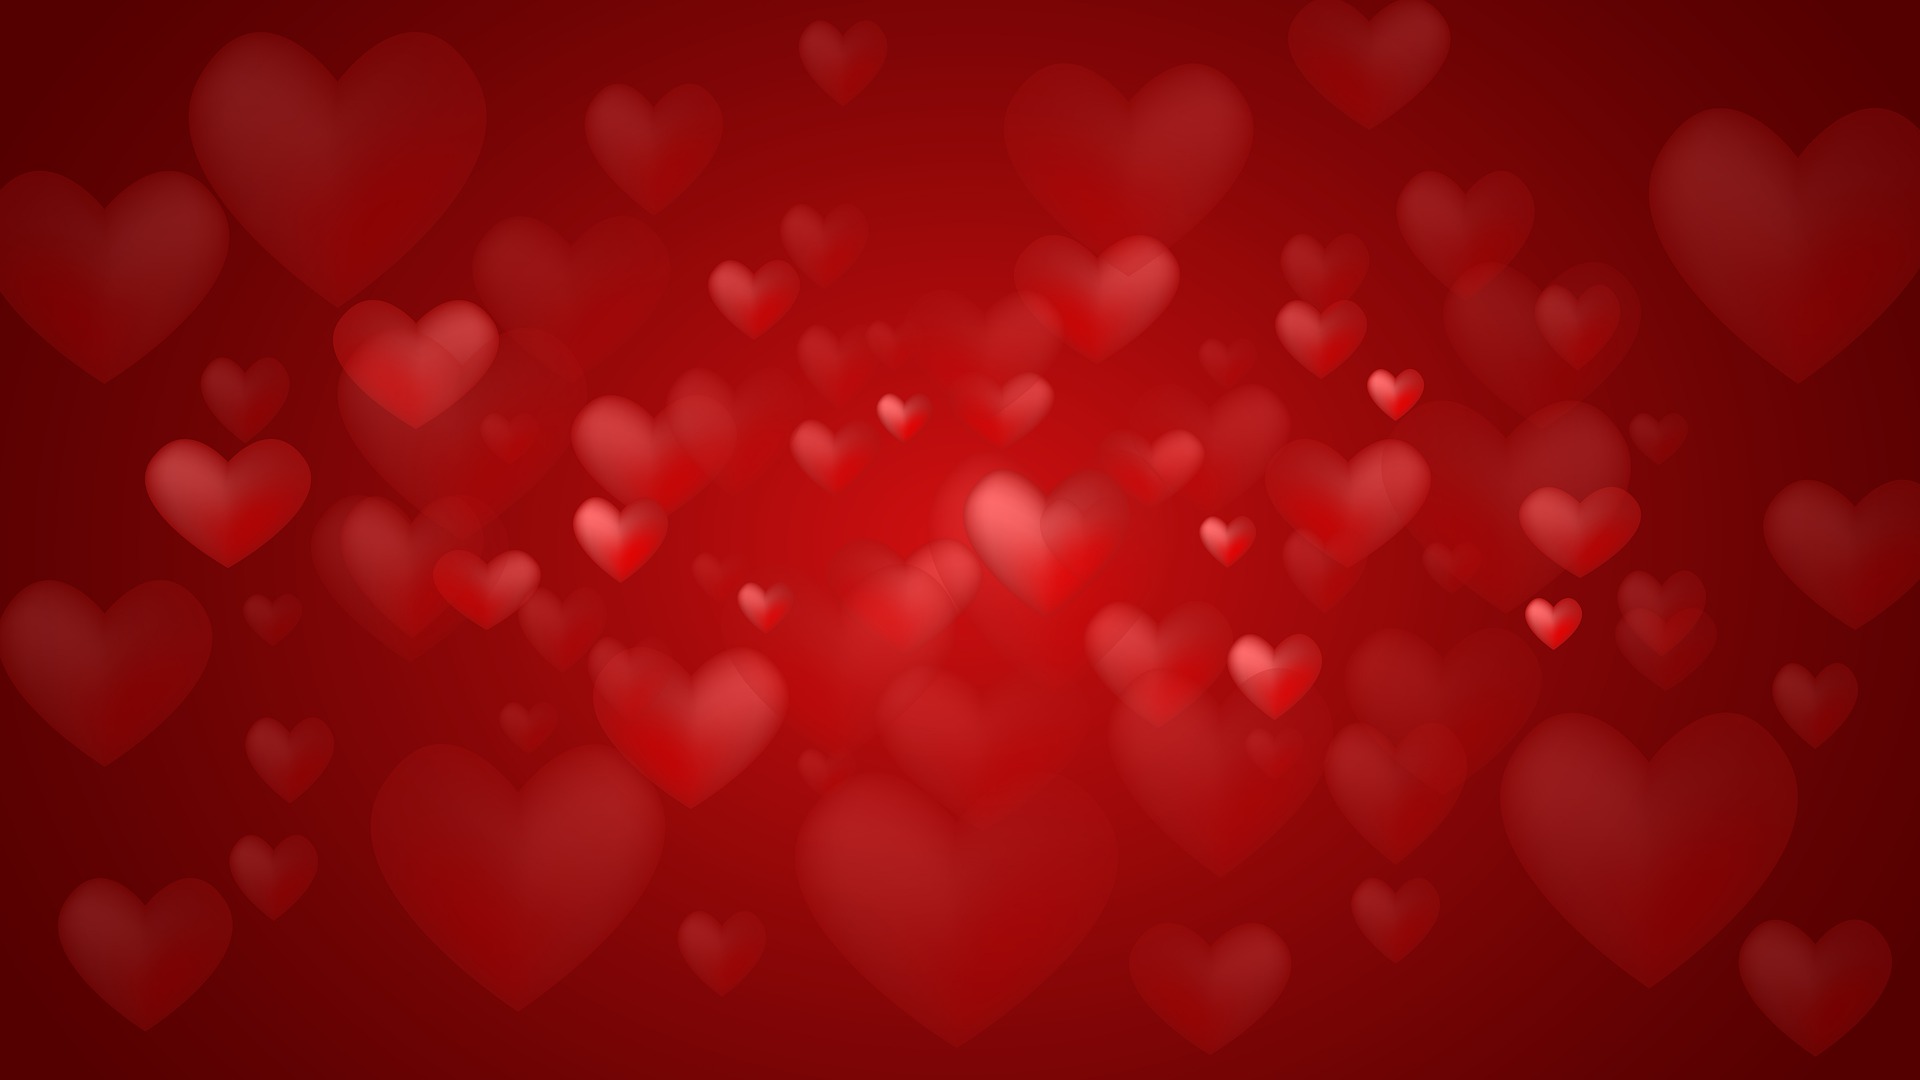 Free Heart Clipart, Heart Background Images, Heart PNG Files and Transparent Heart Images